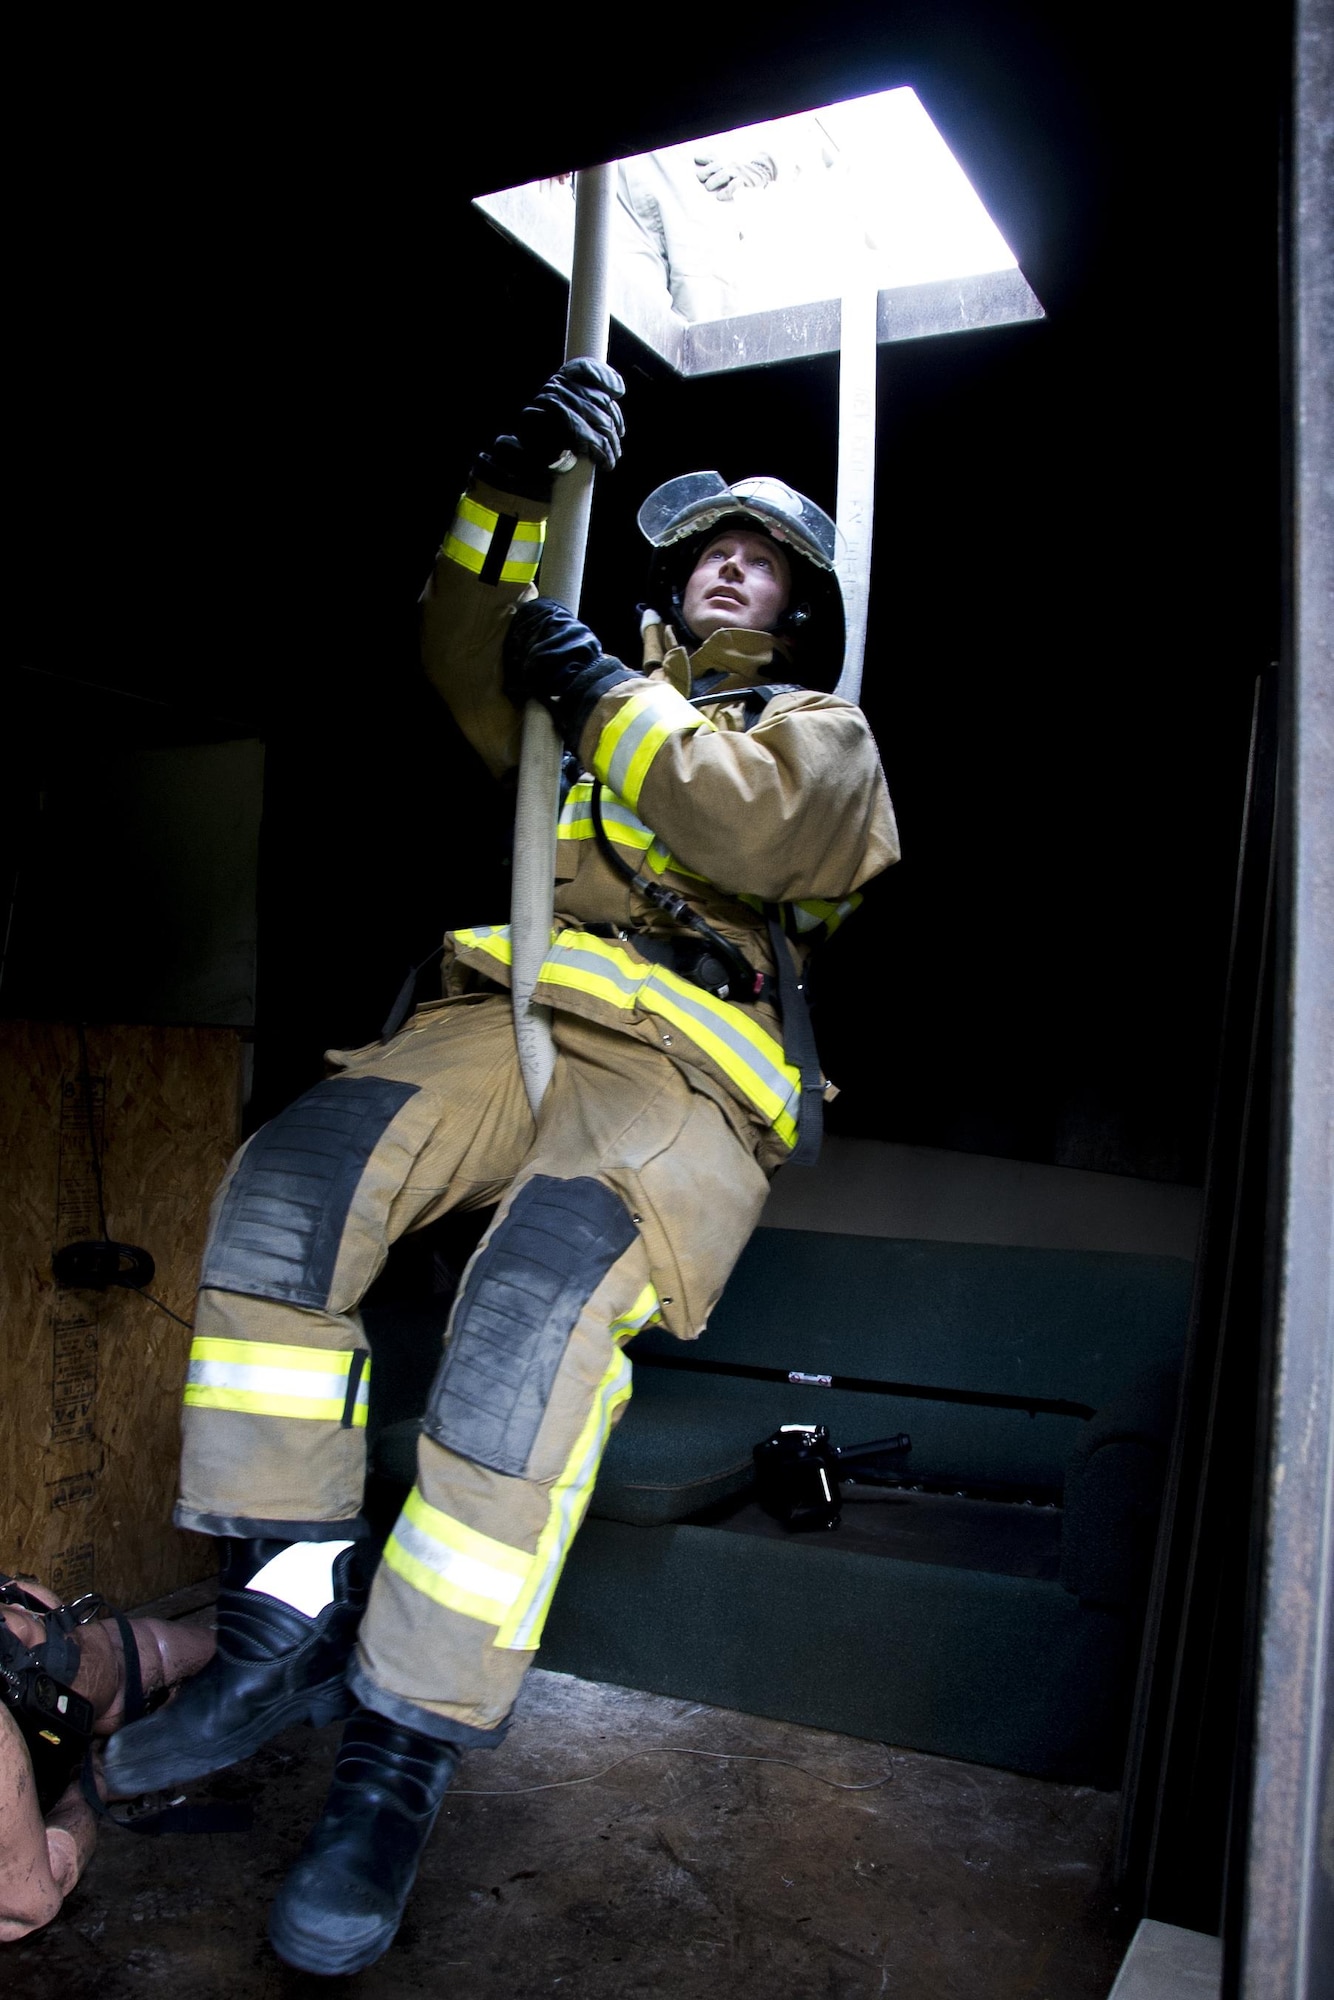 U.S. Air Force Staff Sgt. Tyler Turner, of Columbus, Ohio, and a member of the 445th Civil Engineer Squadron, Wright-Patterson Air Force Base, Ohio, is pulled up by a team of firefighters using the hoseline during the first-ever Air Force Reserve Command Firefighter Rescue and Survival Course at Dobbins Air Reserve Base, Ga., April 18, 2017. Twenty Citizen Airmen participated in the intense 50-hour course held at the 622nd Civil Engineer Group expeditionary combat support-training certification center, which focused on a Rapid Intervention Crew, or RIC. The RIC is a dedicated and specially trained group of firefighters whose responsibilities include safely evacuating a distressed firefighter from a structure. (U.S. Air Force photo by Master Sgt. Theanne K. Herrmann)